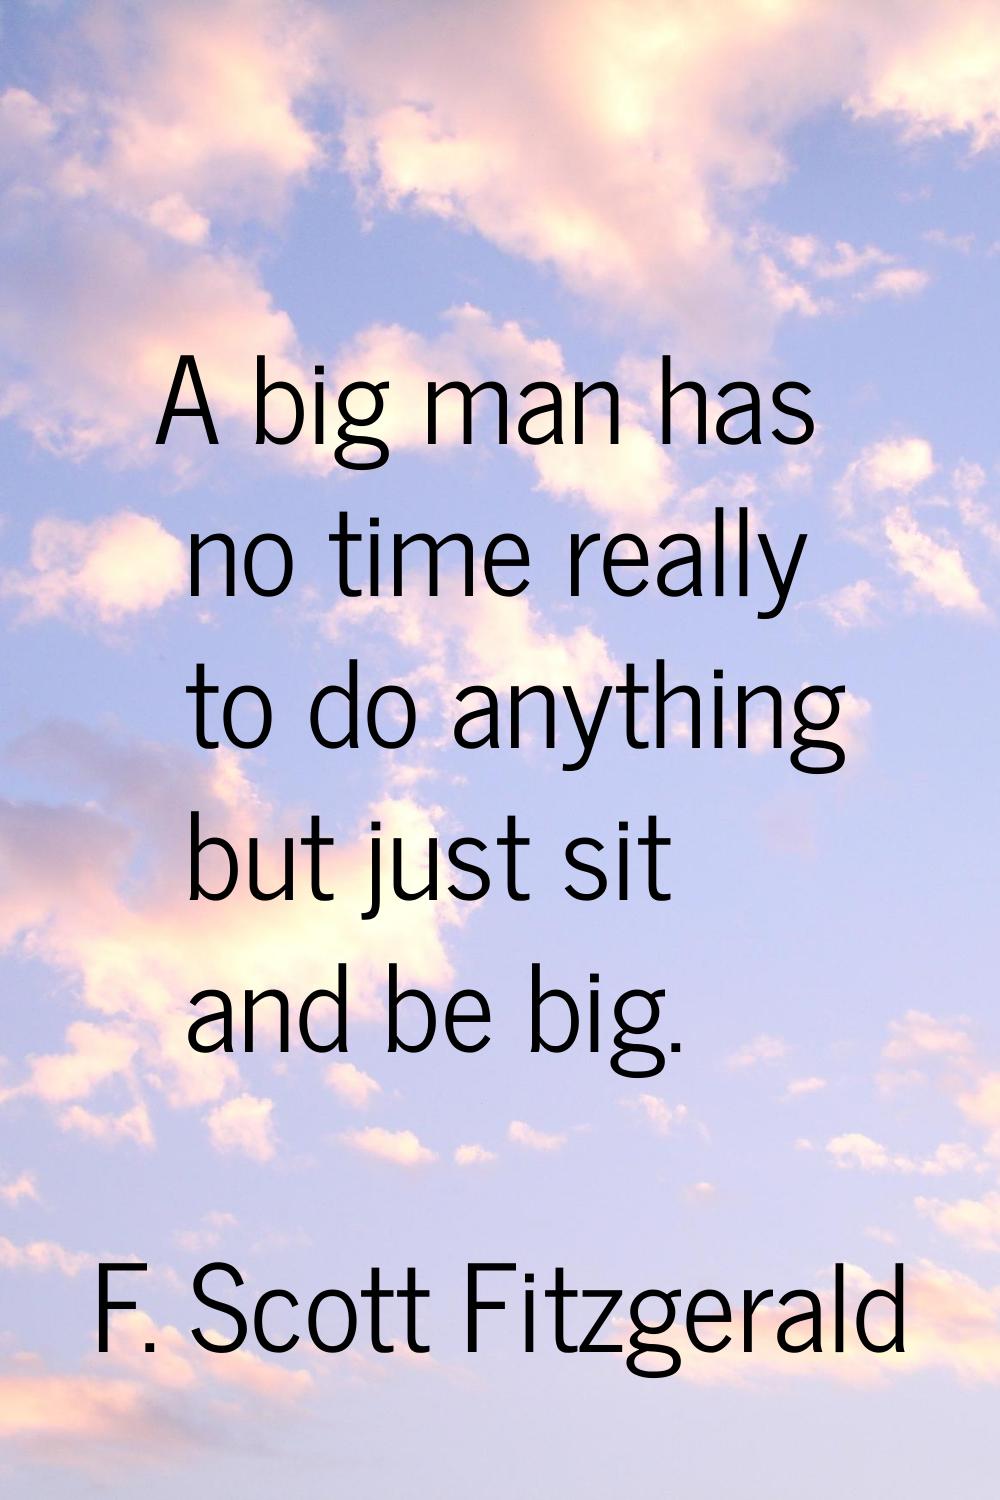 A big man has no time really to do anything but just sit and be big.